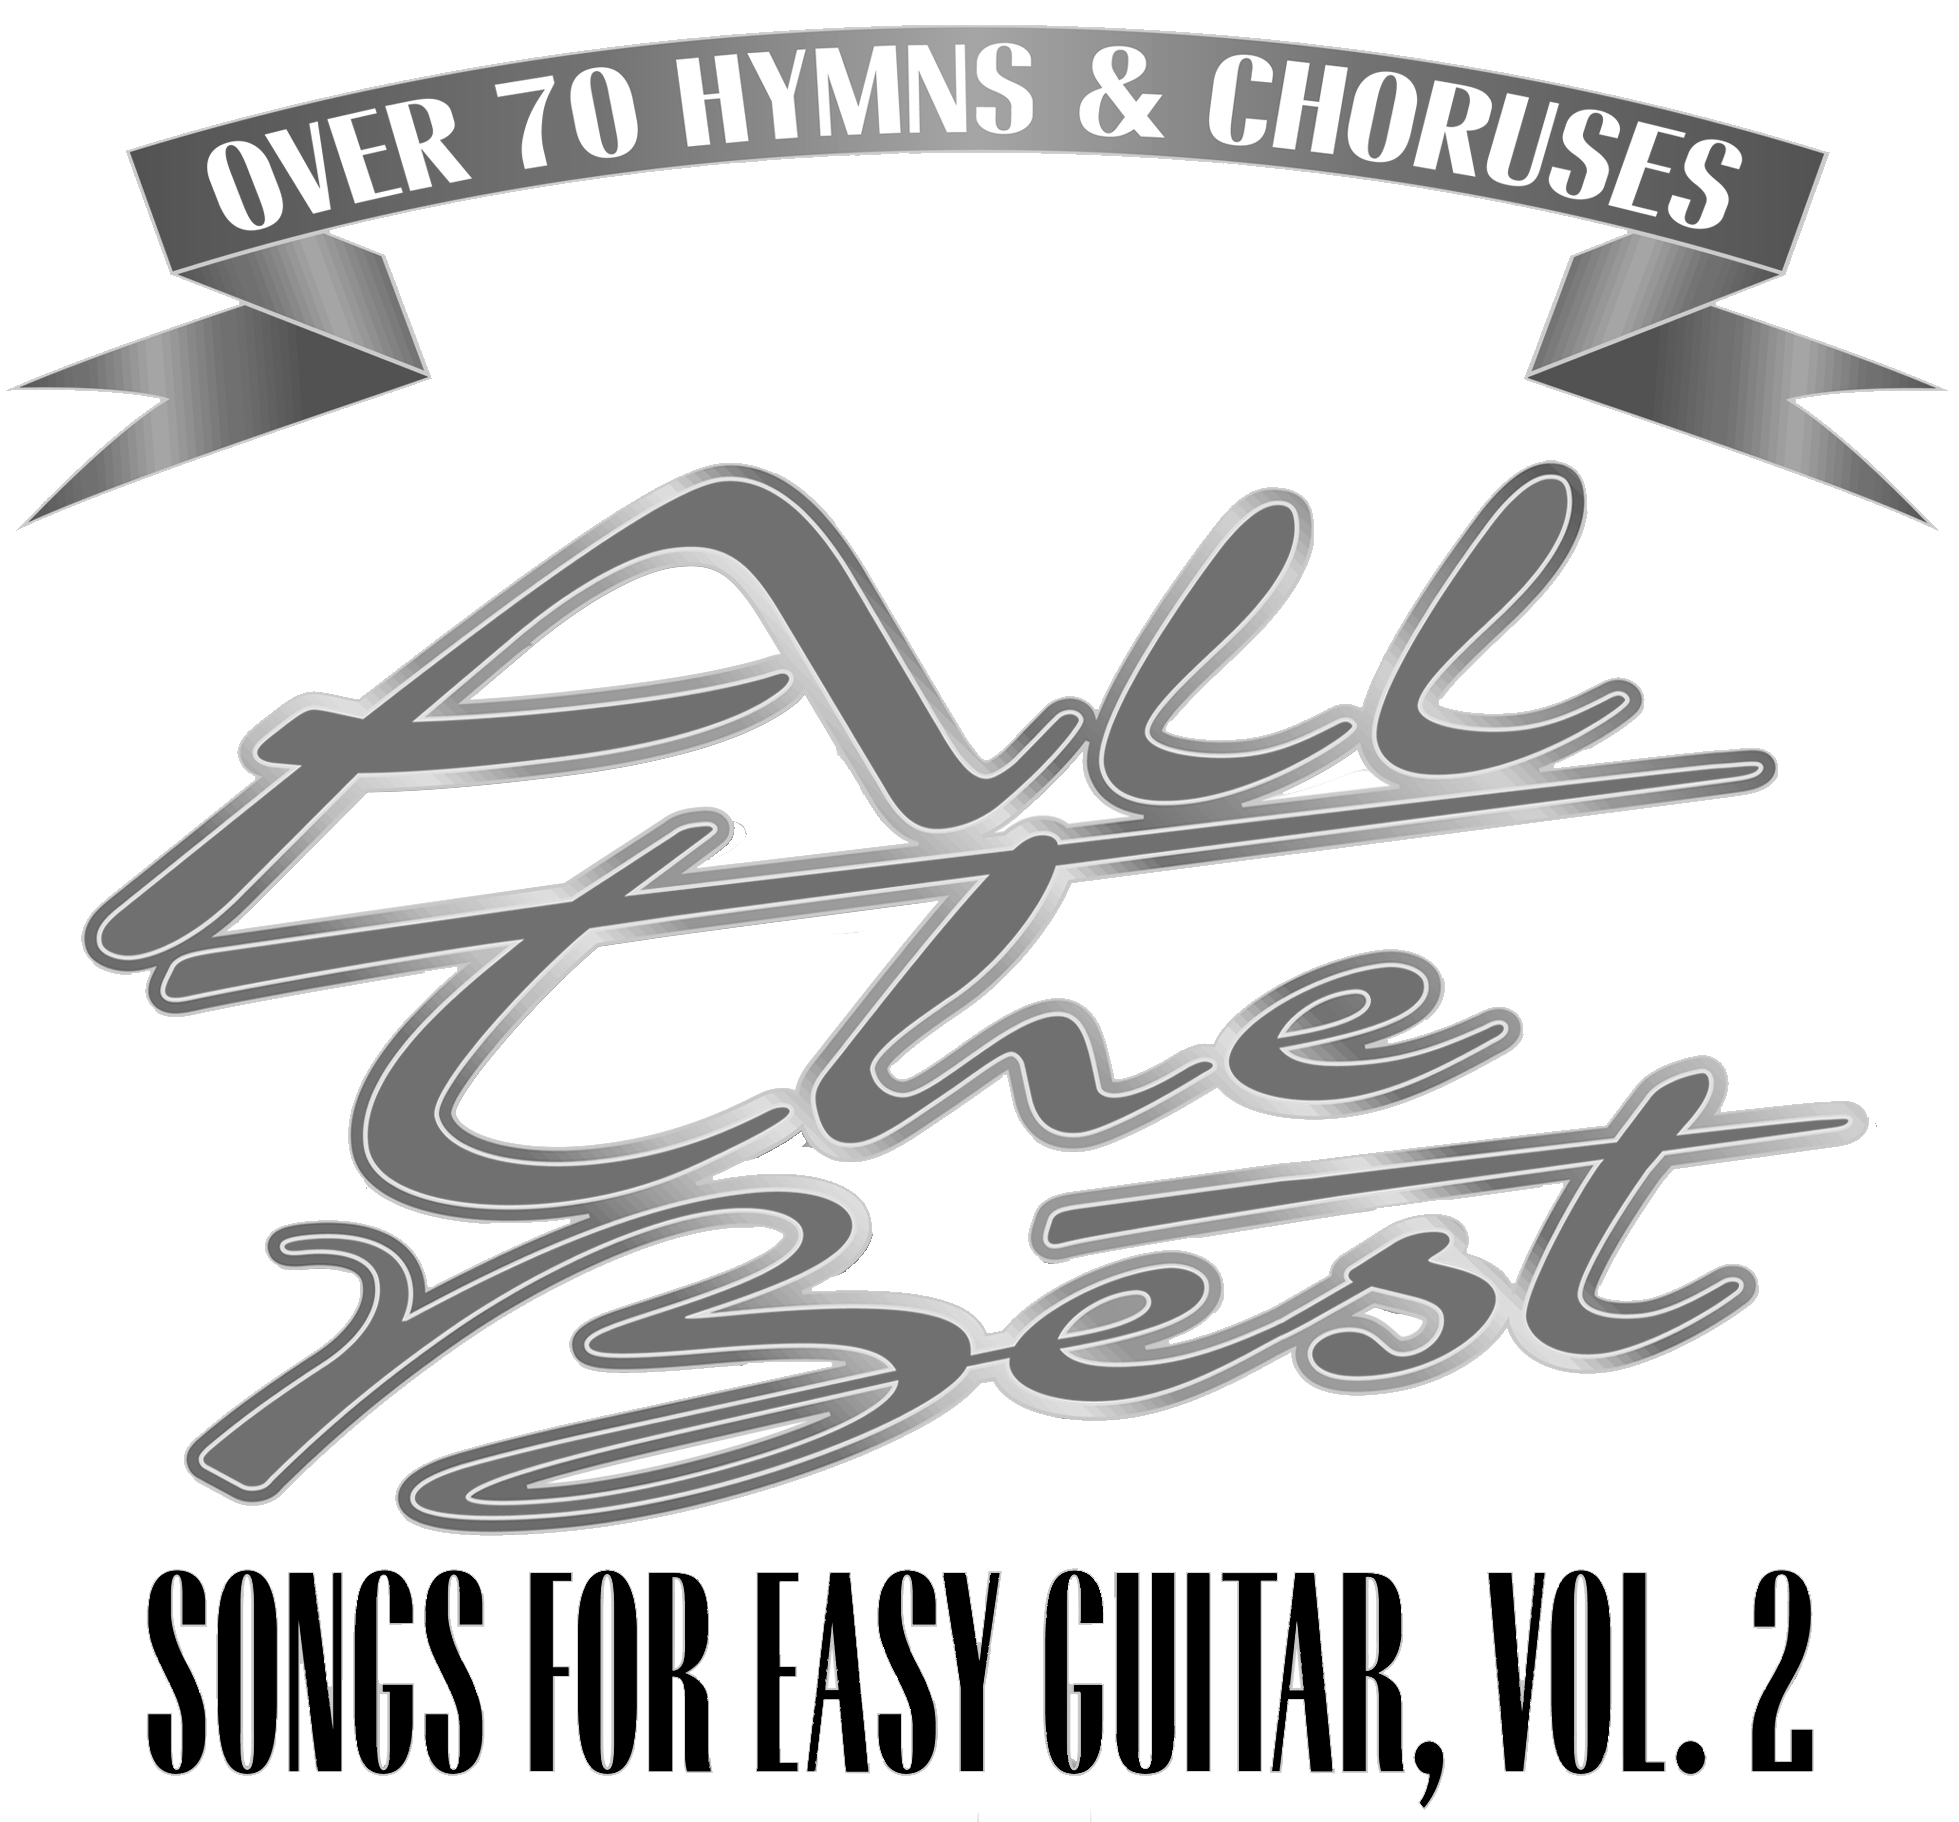 All the Best Songs for Easy Guitar, Vol. 2